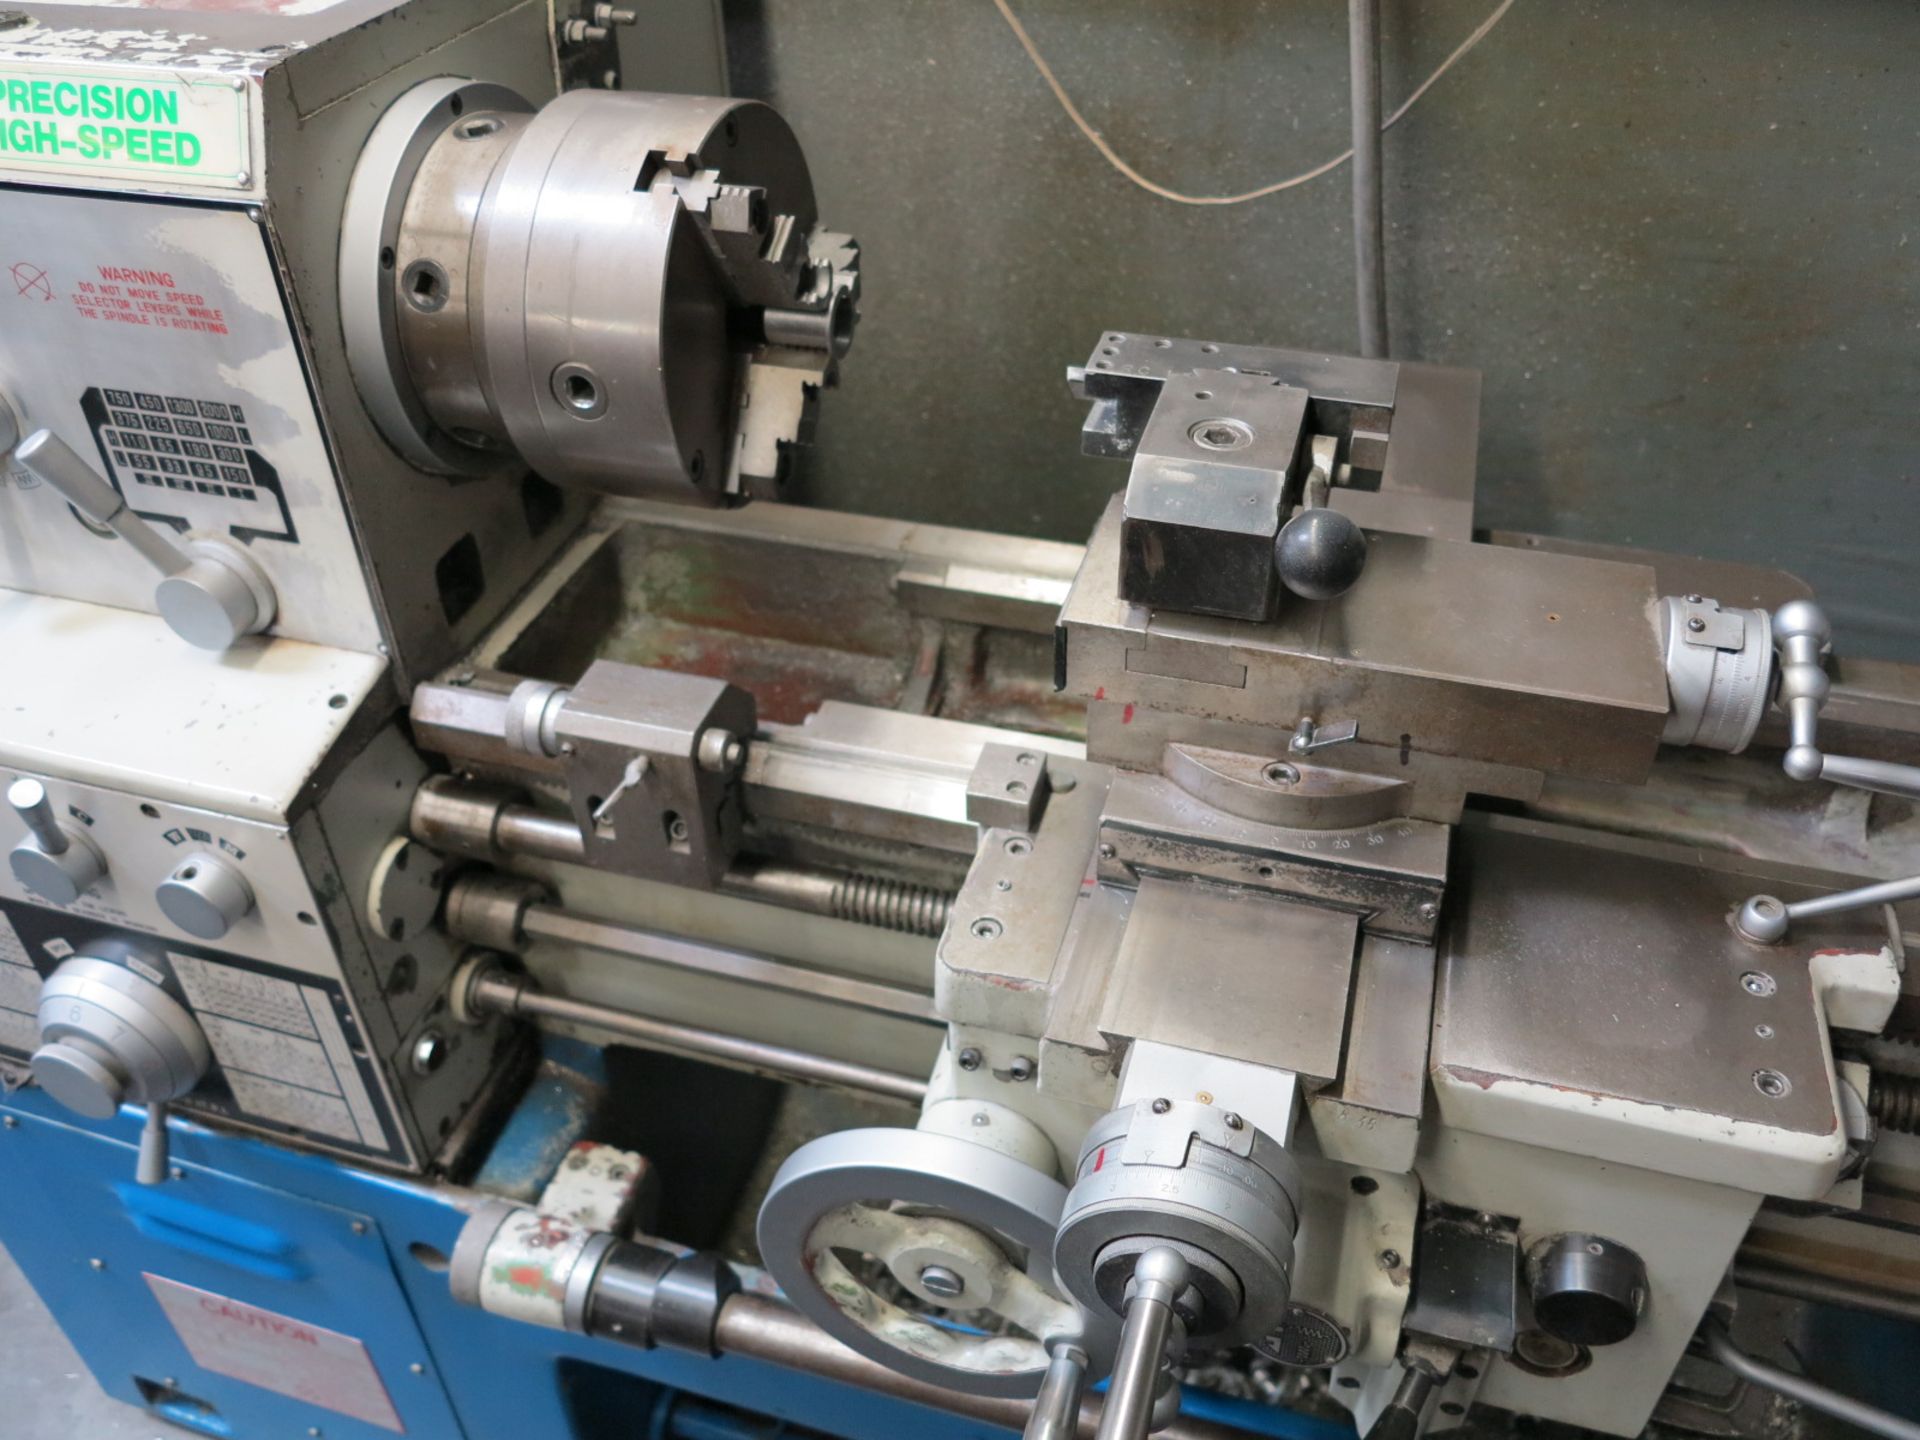 VICTOR PRECISION HIGH-SPEED LATHE, MODEL 1630B - Image 5 of 5